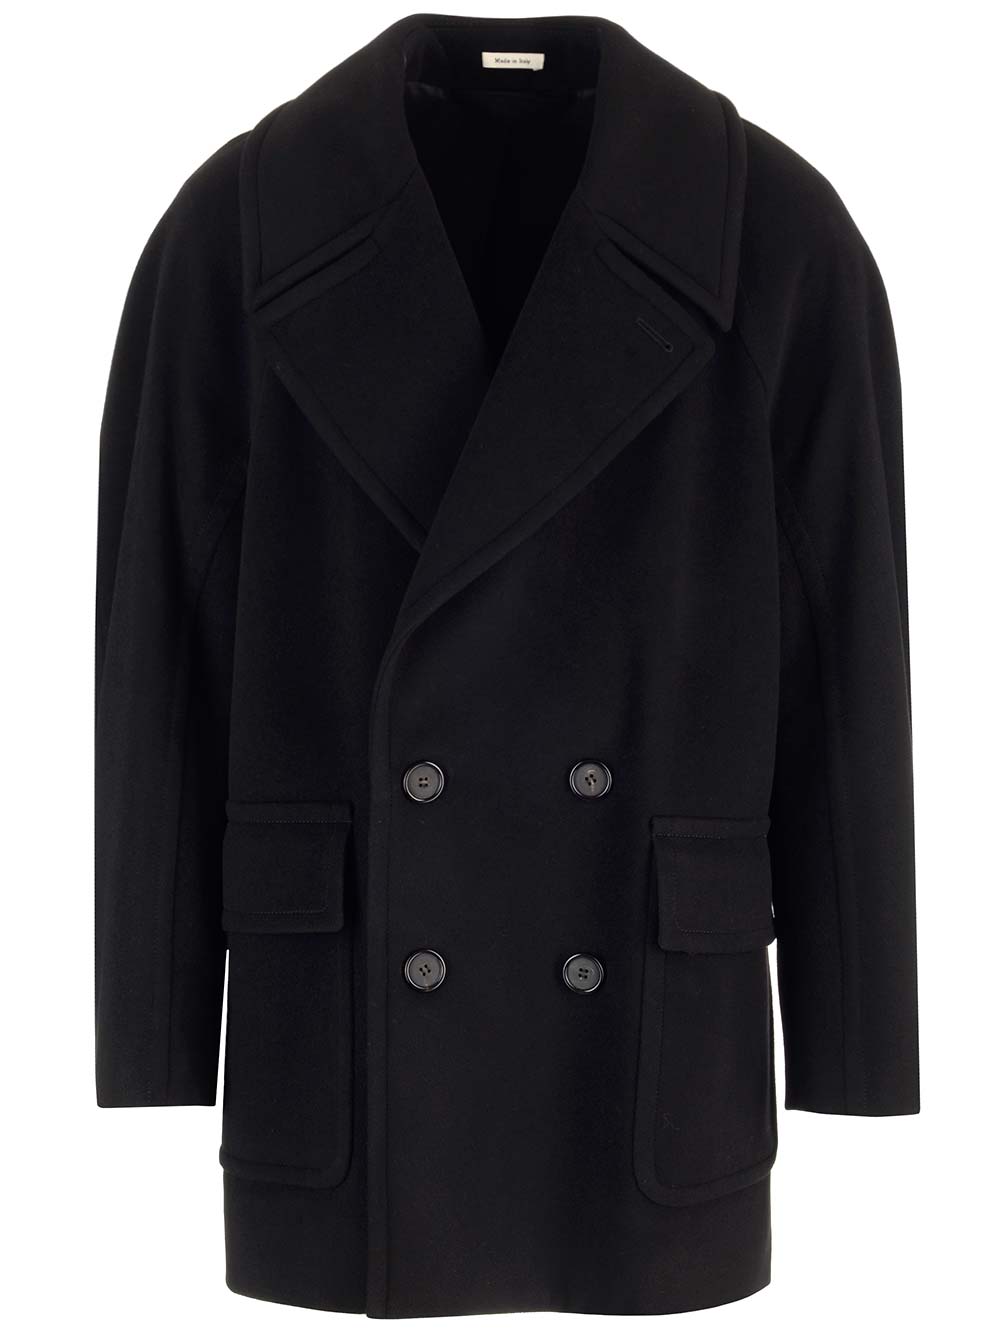 ALEXANDER MCQUEEN WOOL AND CASHMERE PEACOAT